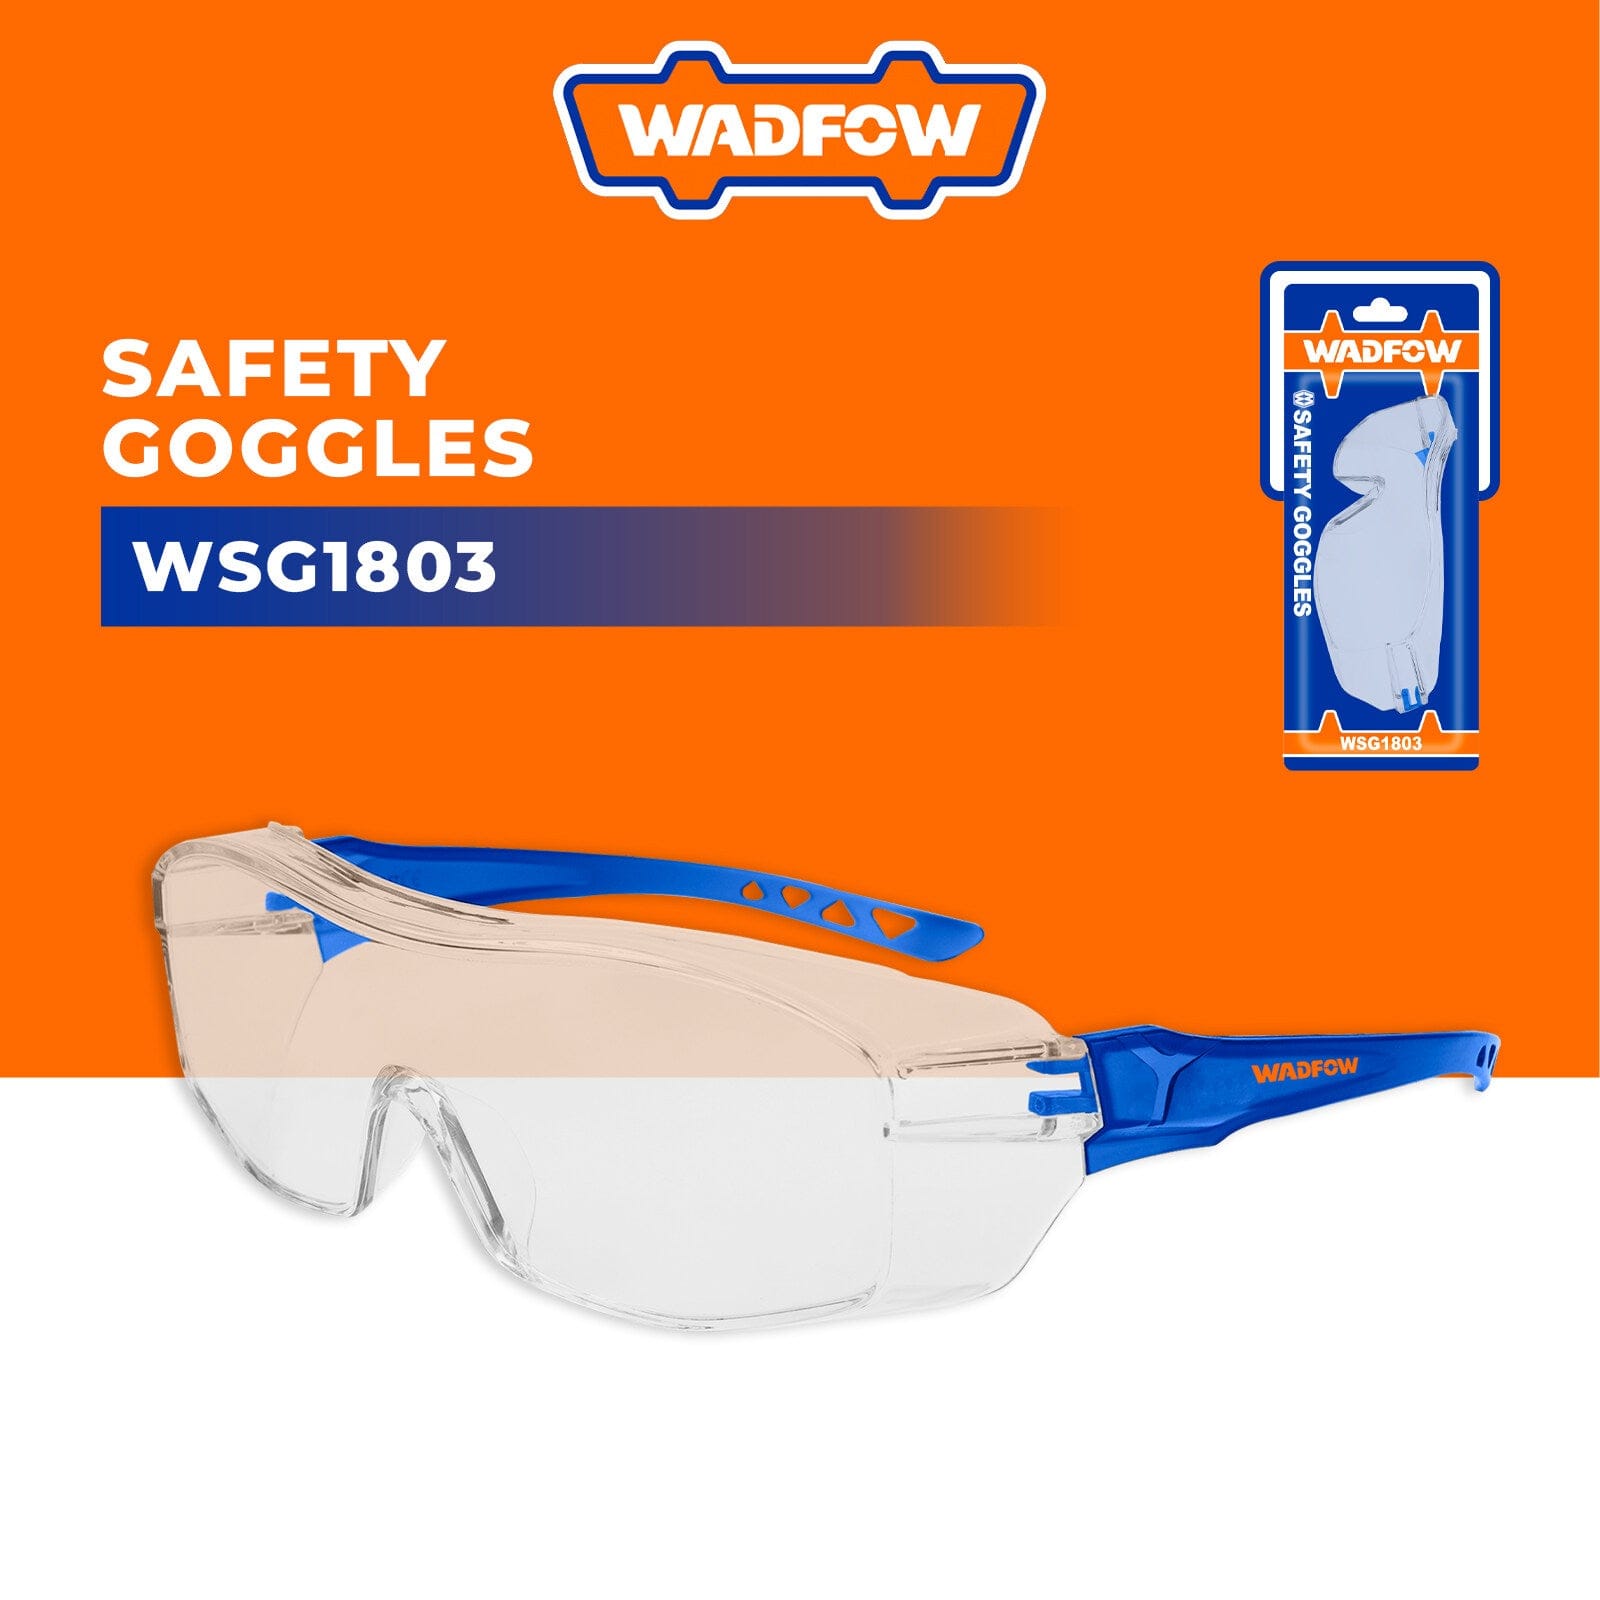 Buy Wadfow Safety Goggles (WSG1803) Online in Accra, Ghana | Supply Master Eye Protection & Safety Glasses Buy Tools hardware Building materials